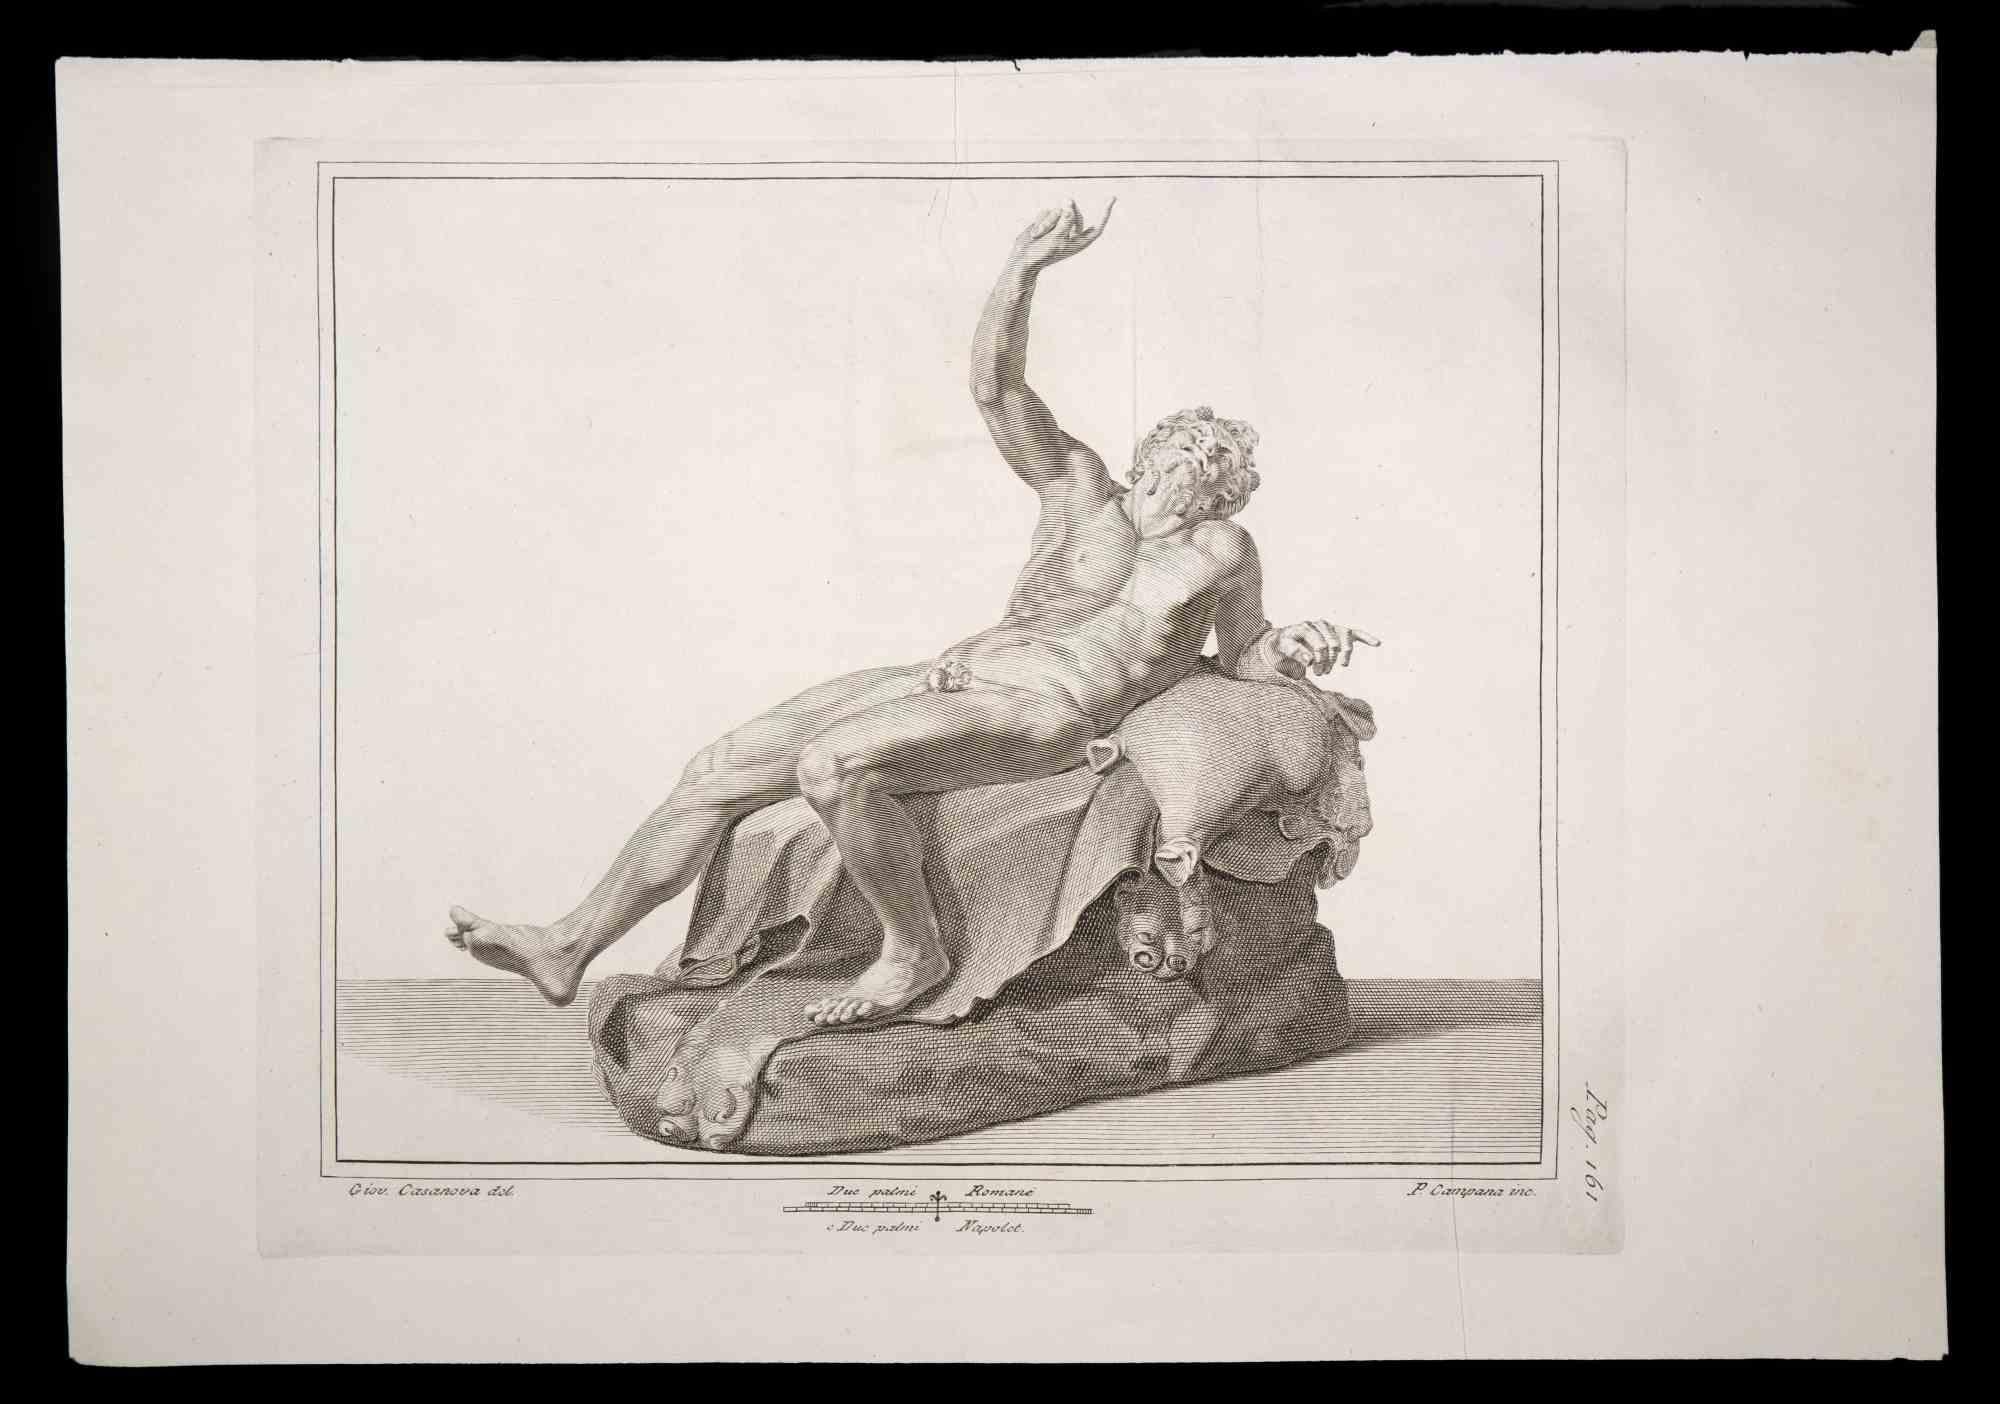 Dionysus, Ancient Roman Statue -  Etching by P. Campana - 18th century